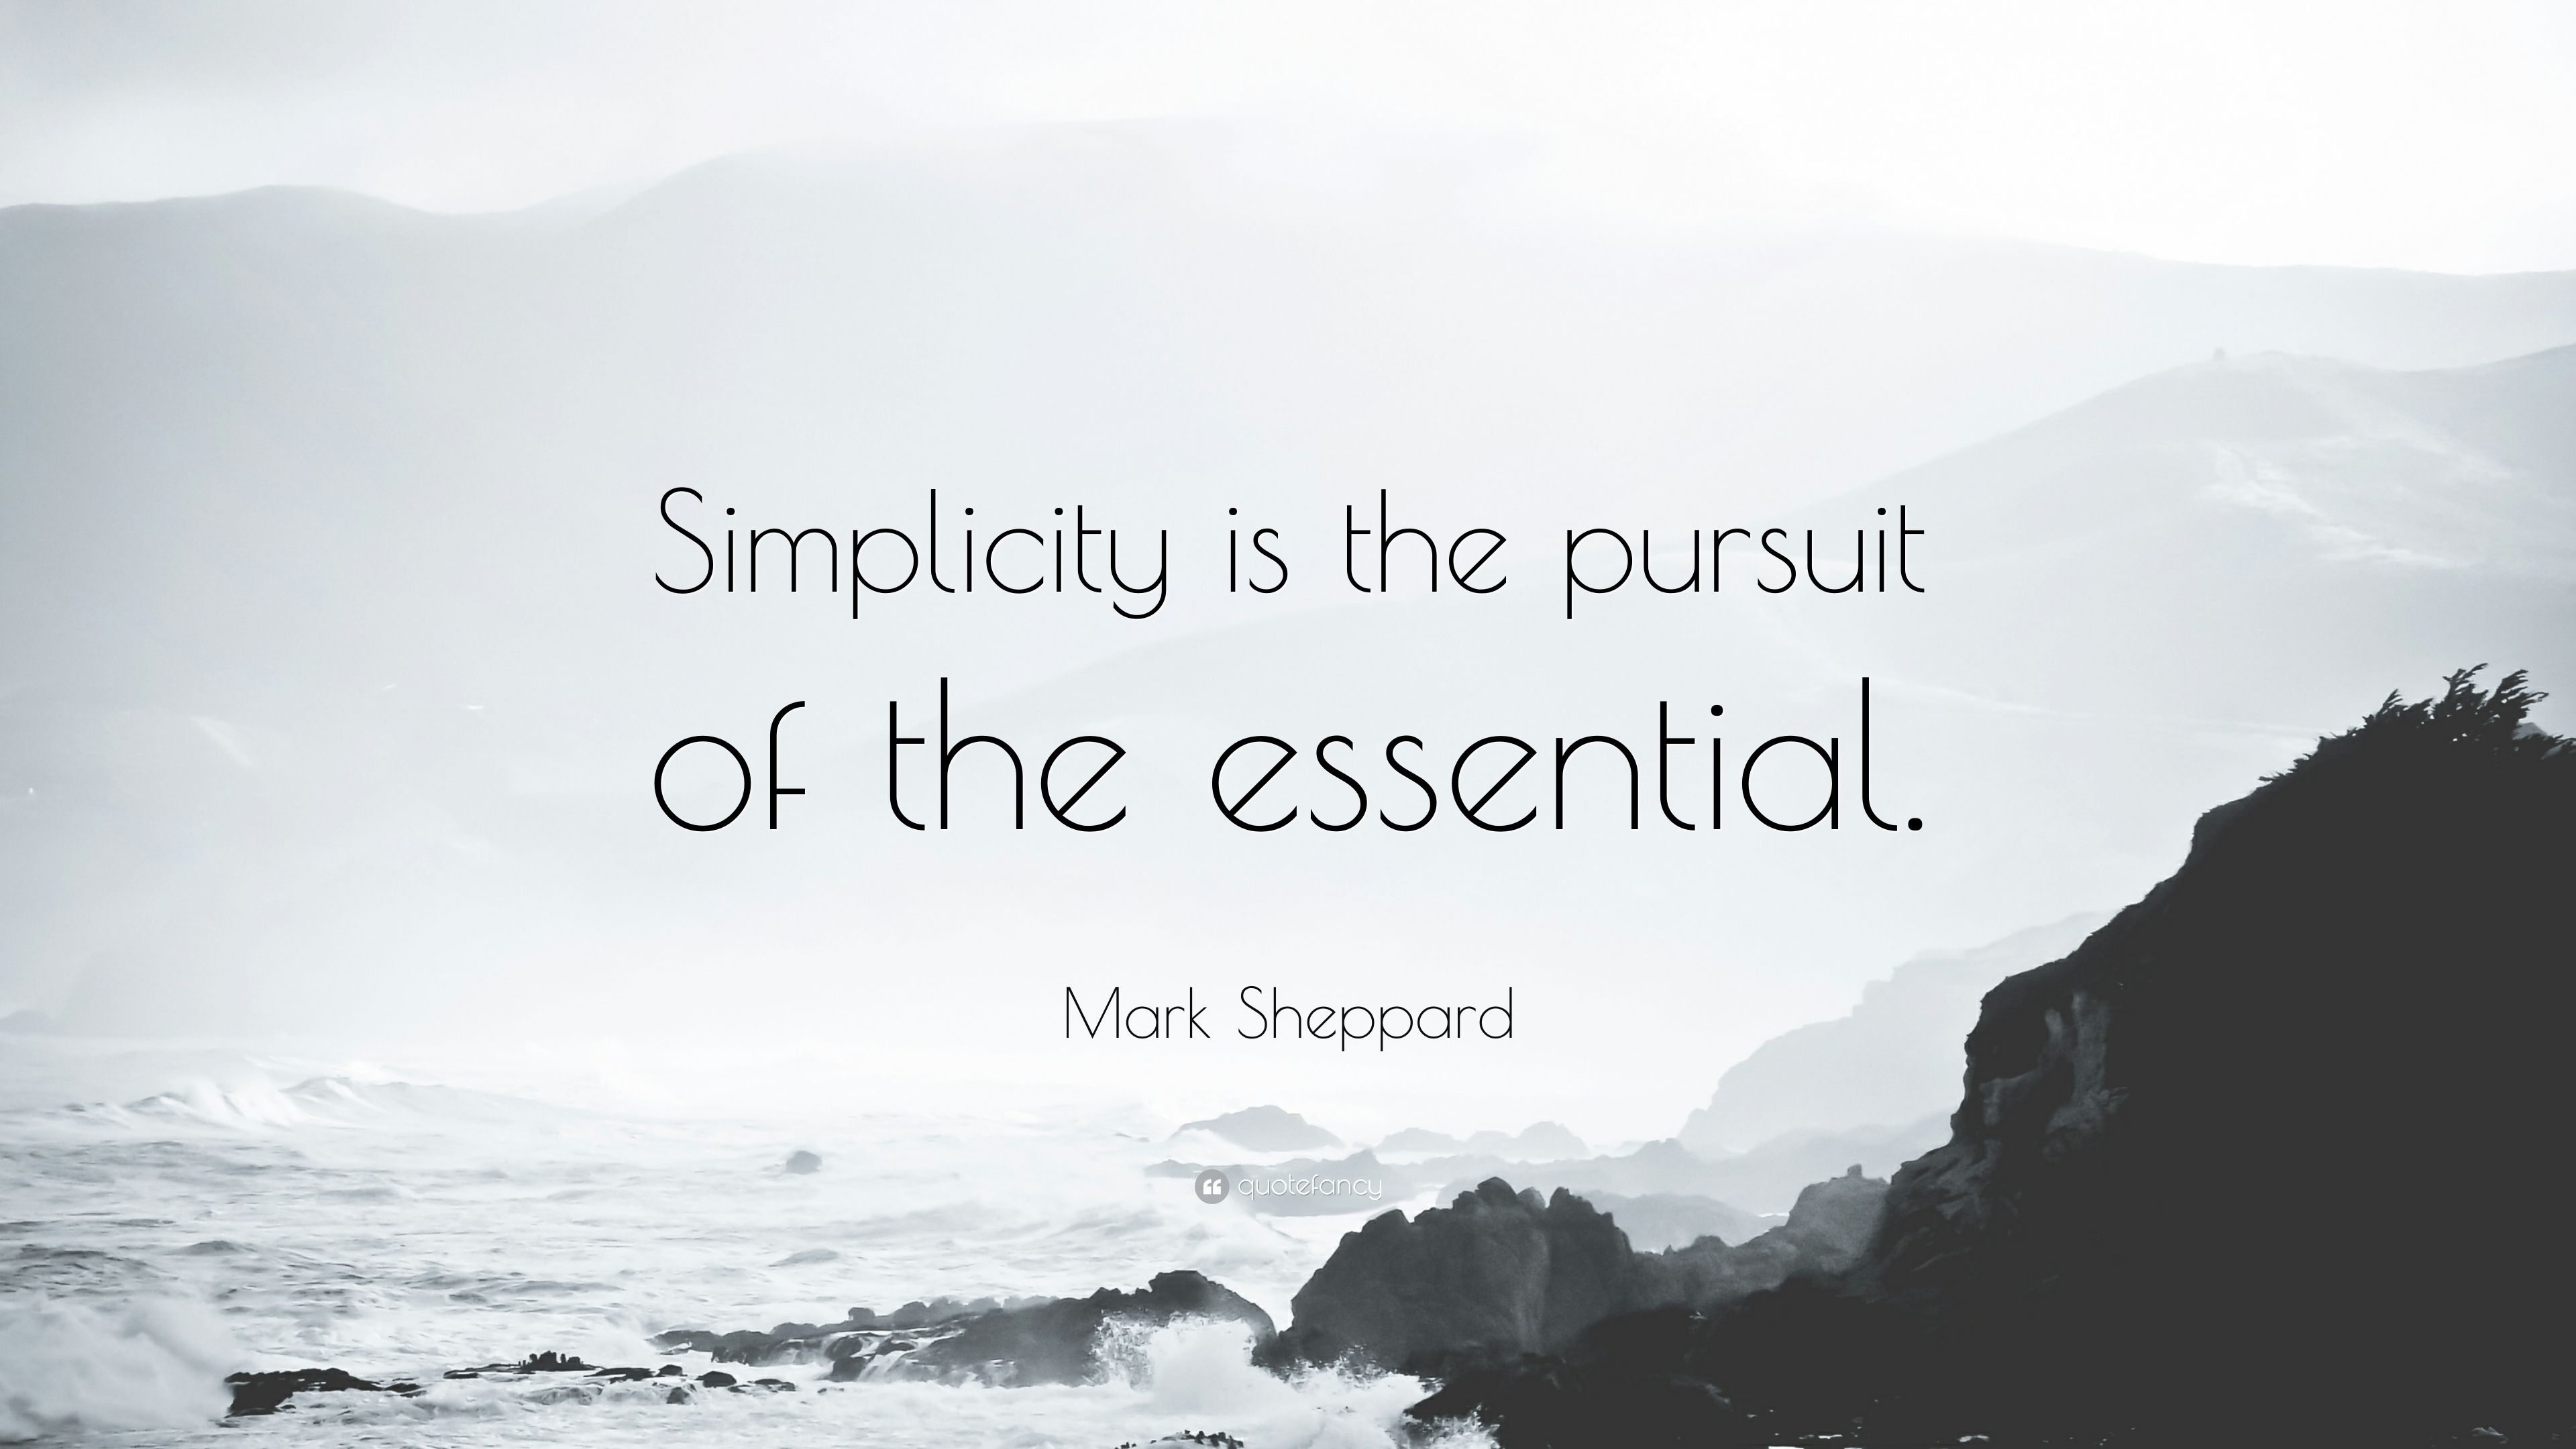 Mark Sheppard Quote: “Simplicity is the pursuit of the essential